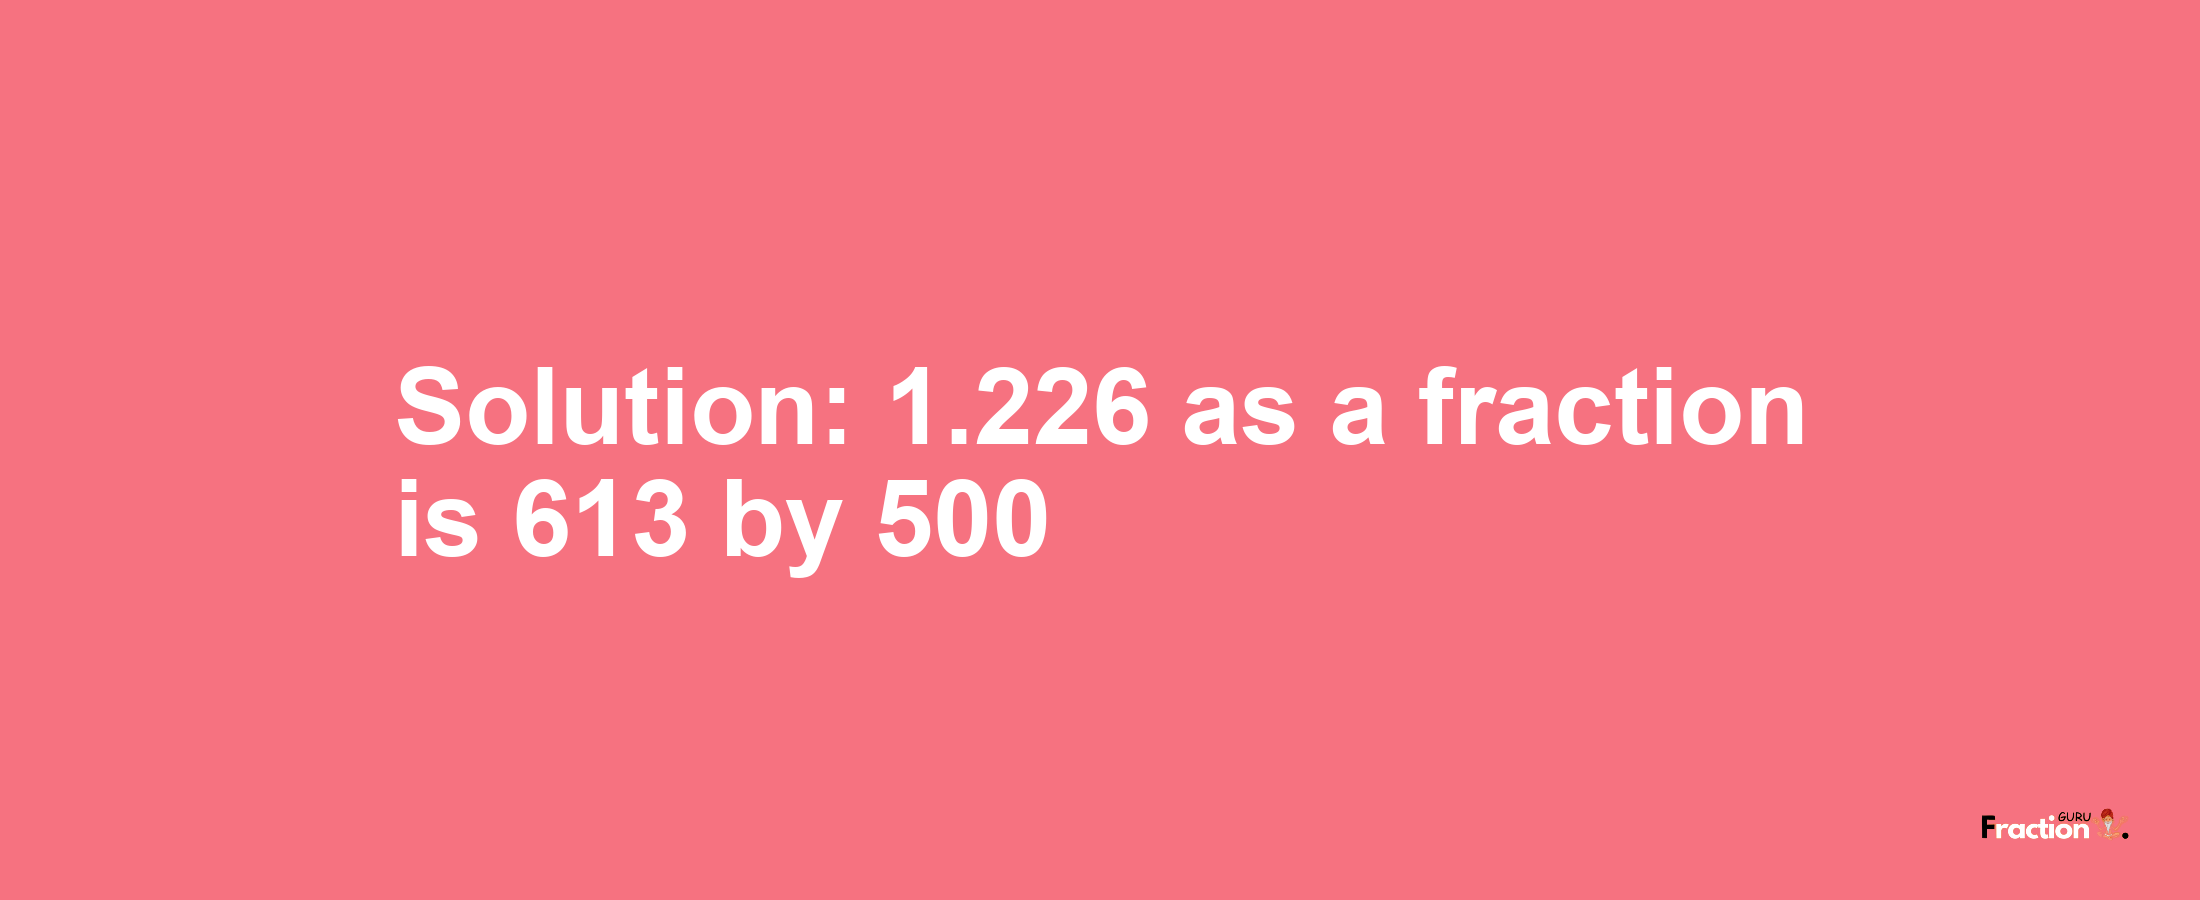 Solution:1.226 as a fraction is 613/500